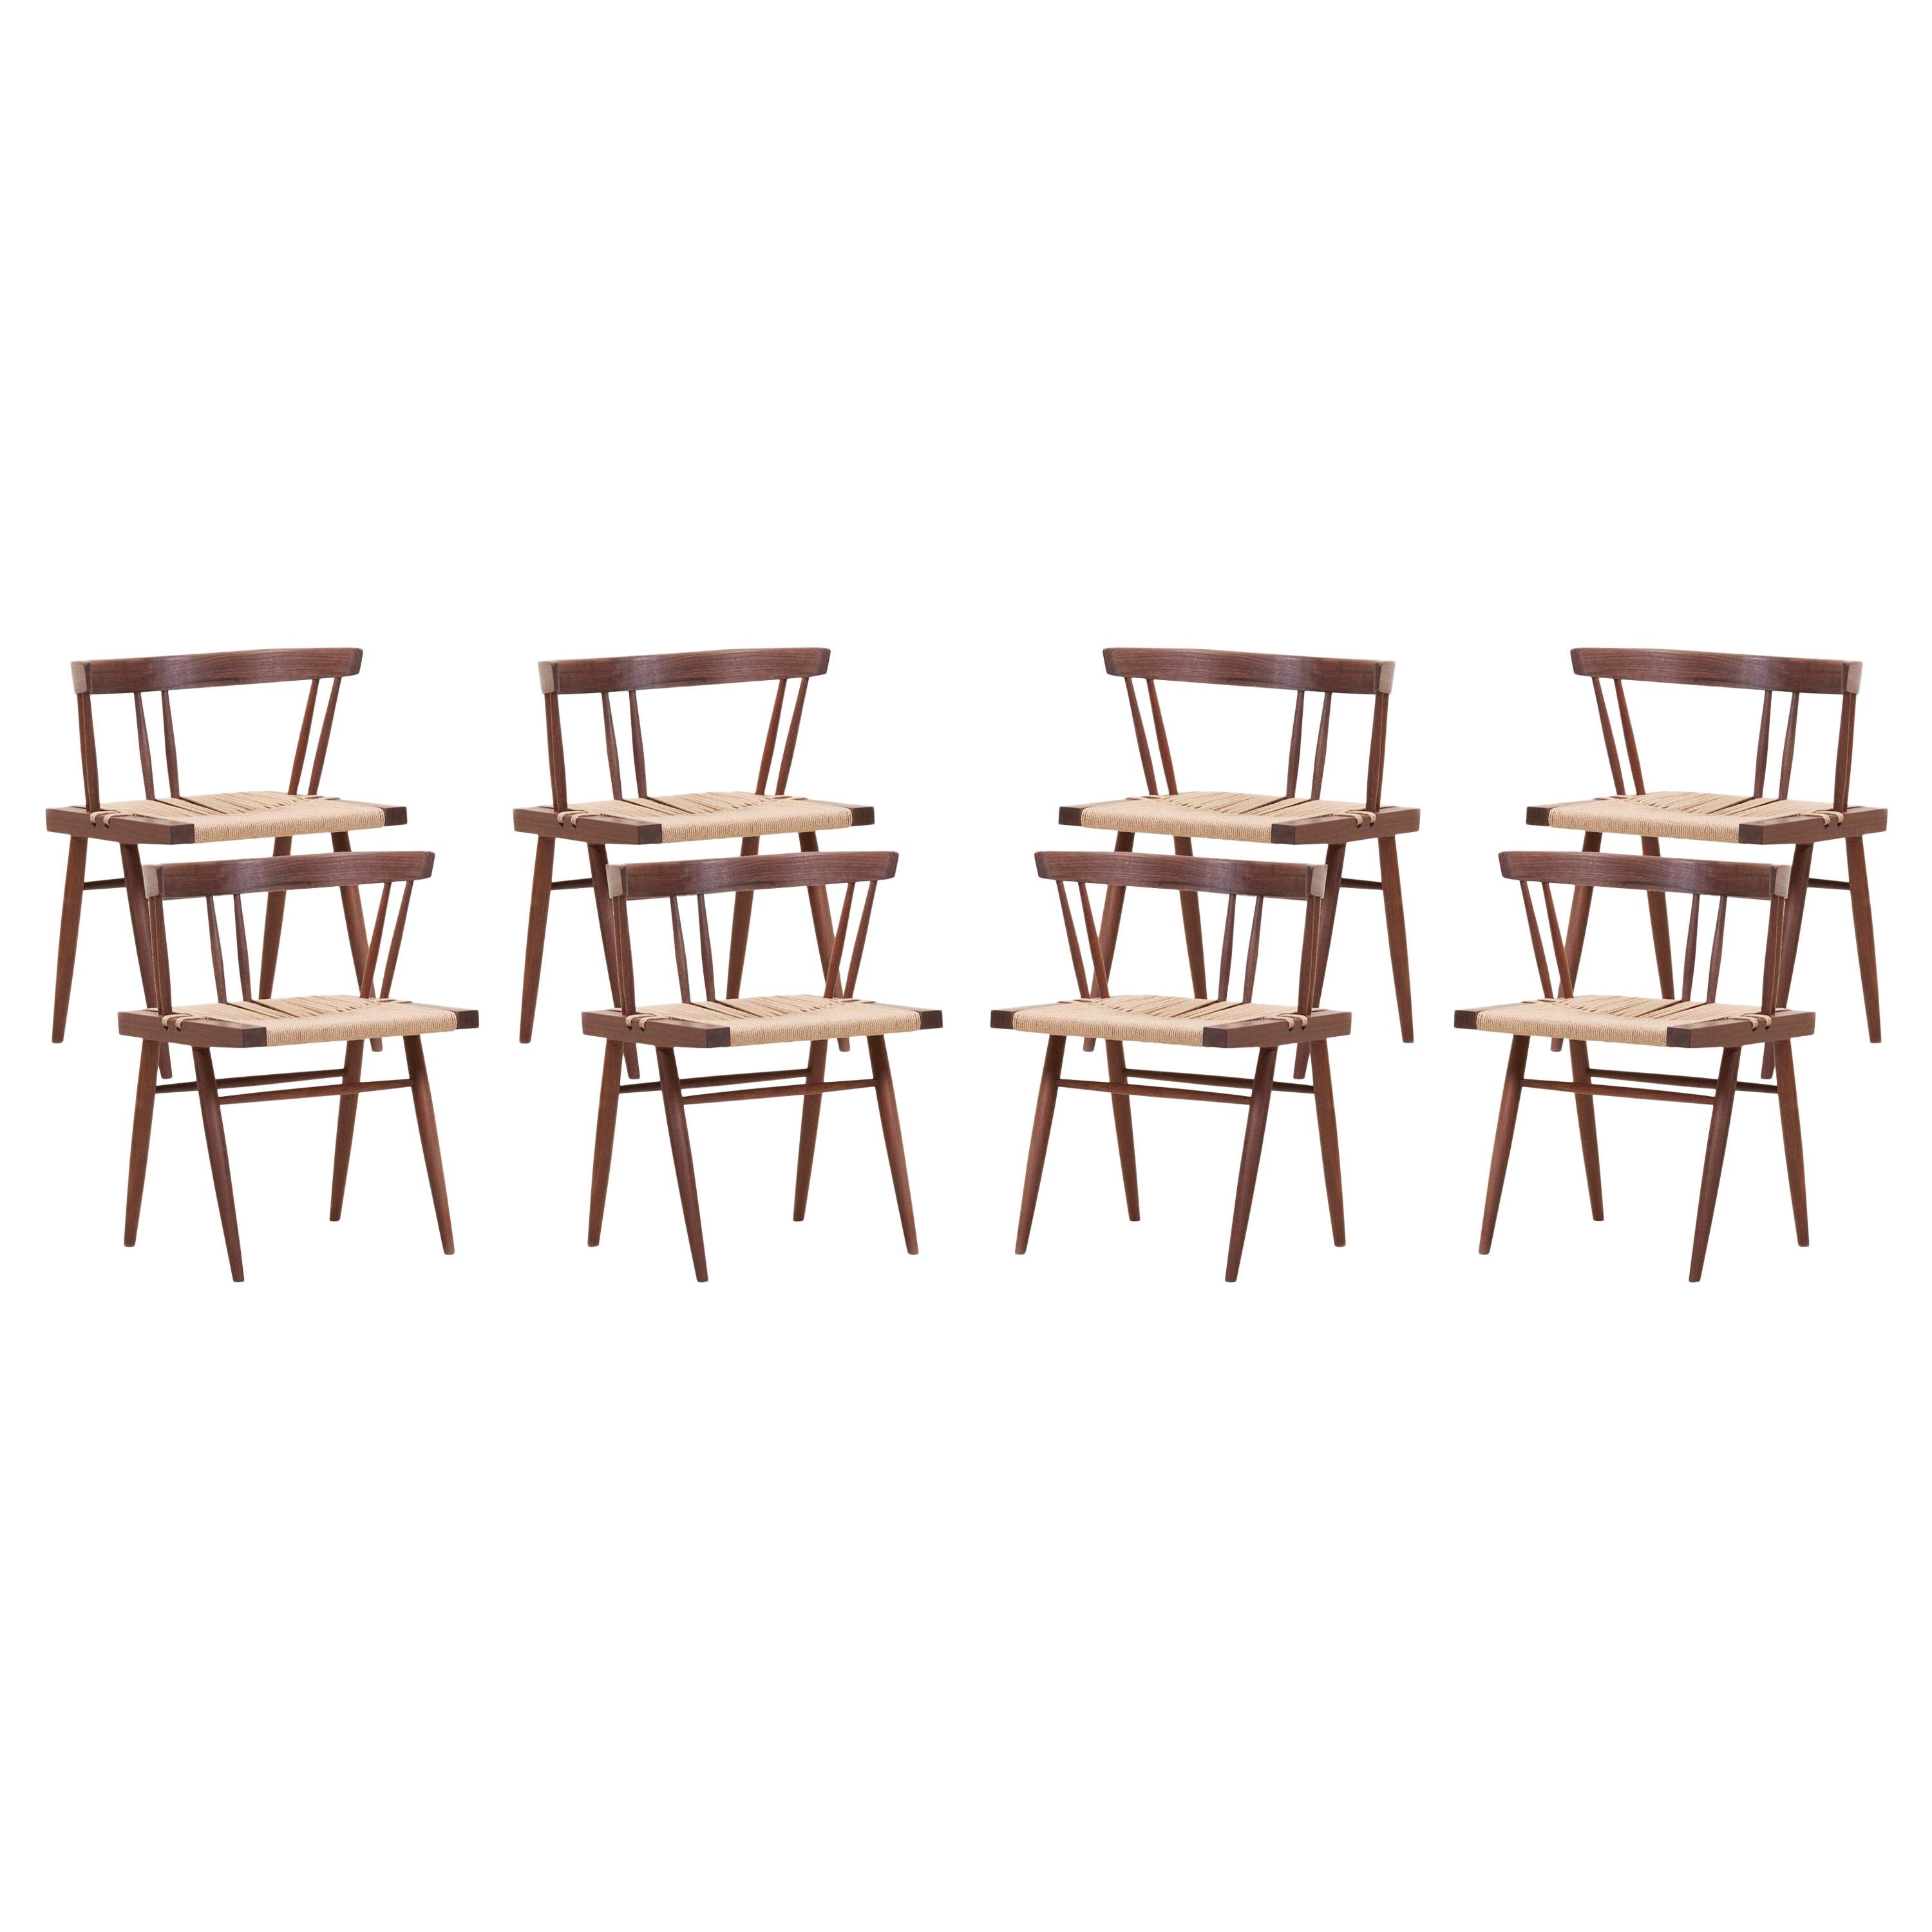 Set of Six Grass Seated Dining Chairs by George Nakashima Studio, US - 2019